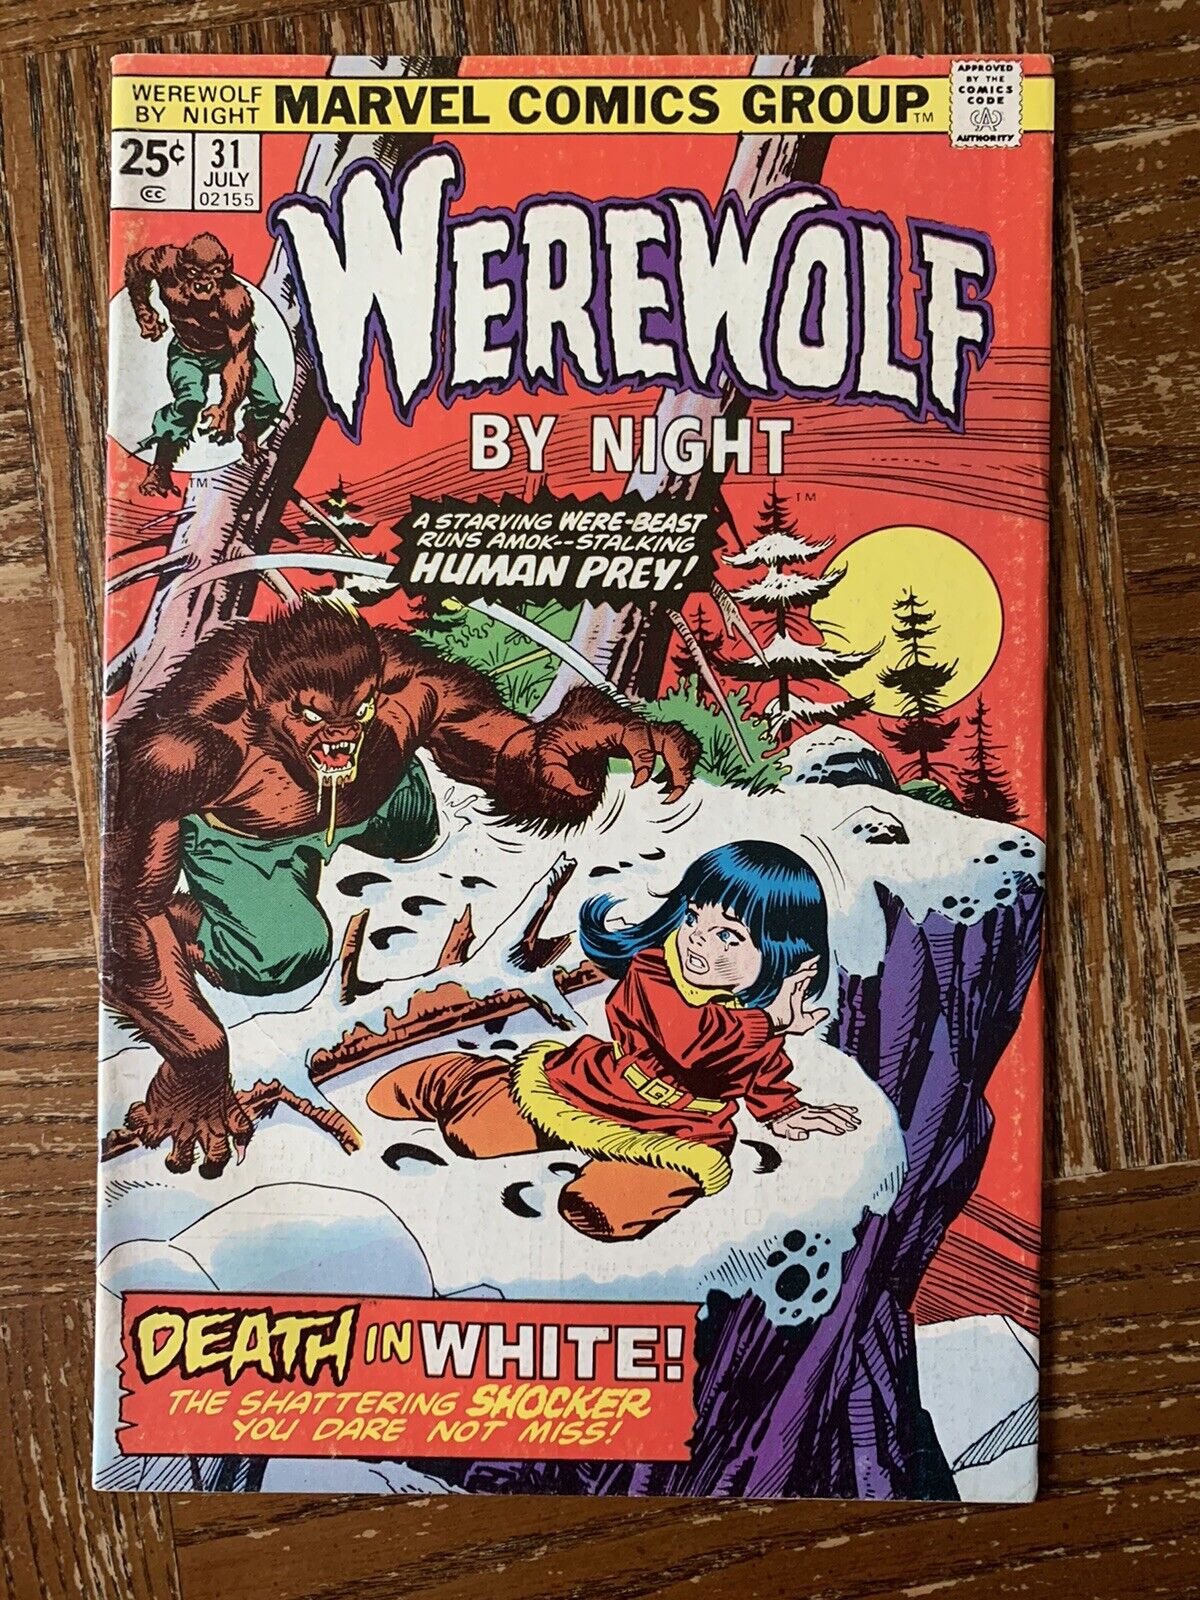 WEREWOLF BY NIGHT # 31 MARVEL COMICS FIRST MENTION OF MOON KNIGHT TEXT 1975